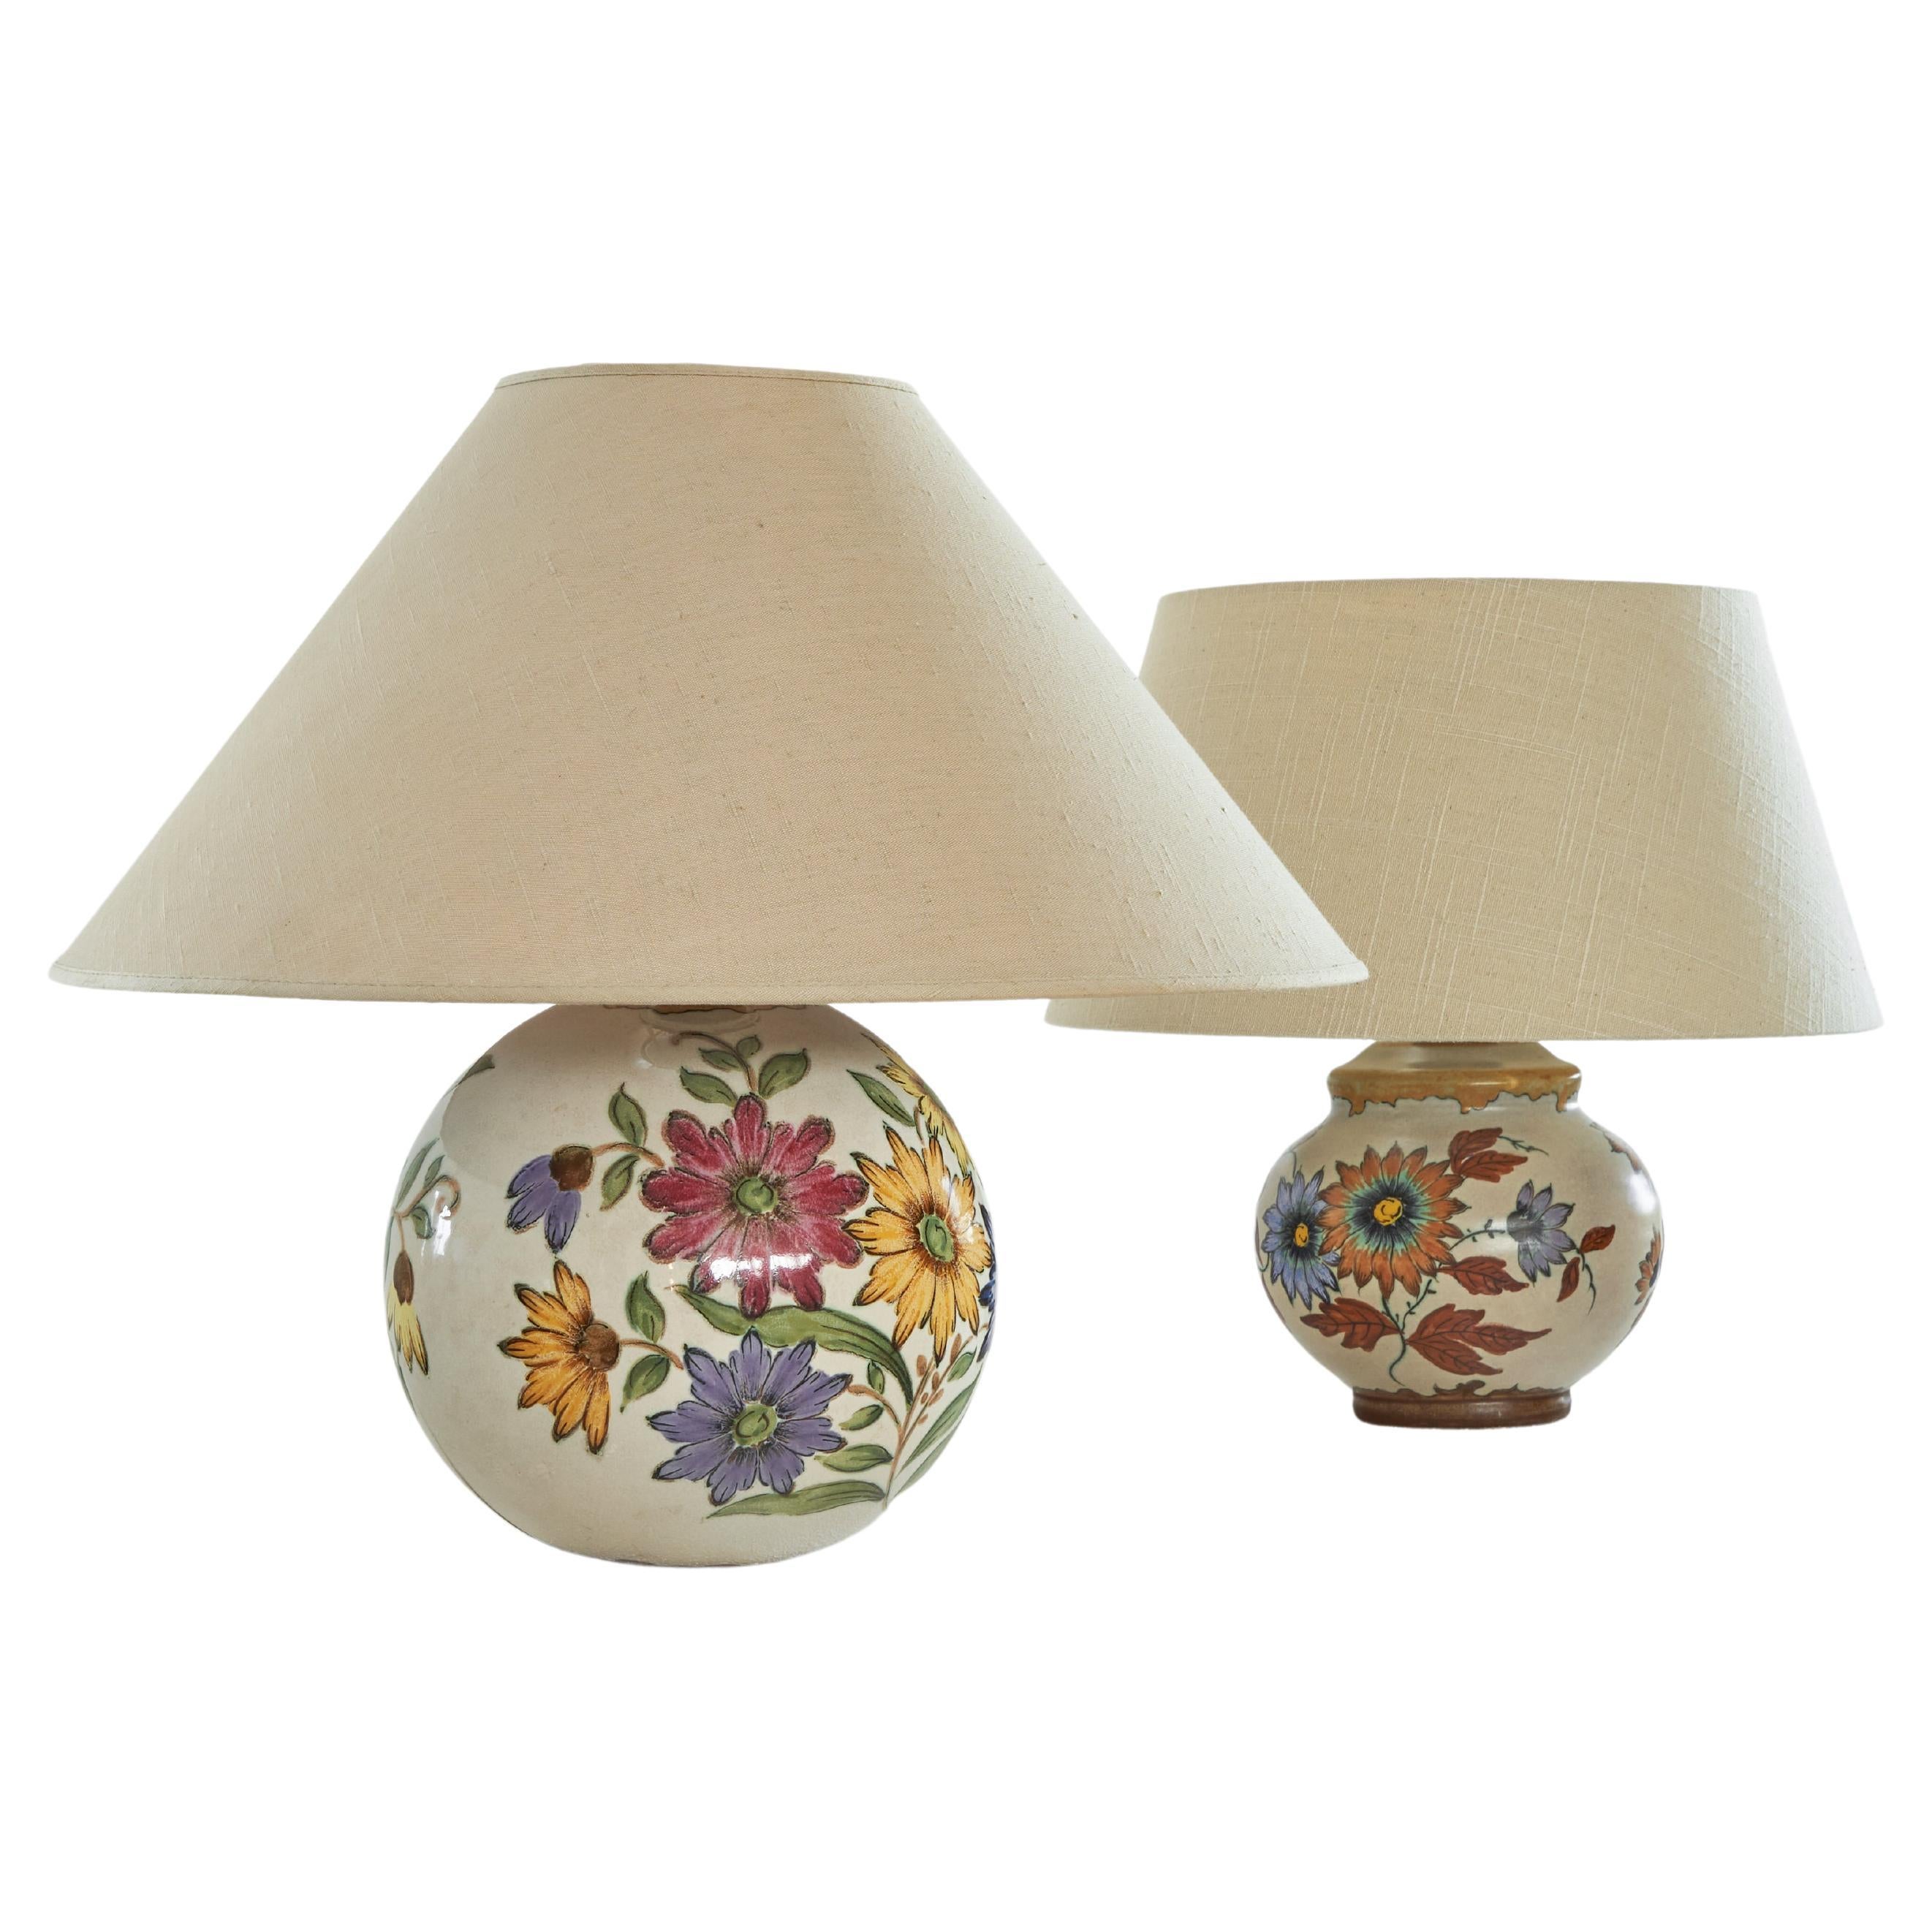 Pair of Wonderful Dutch Ceramic Table Lamps with Floral Decor 1930s